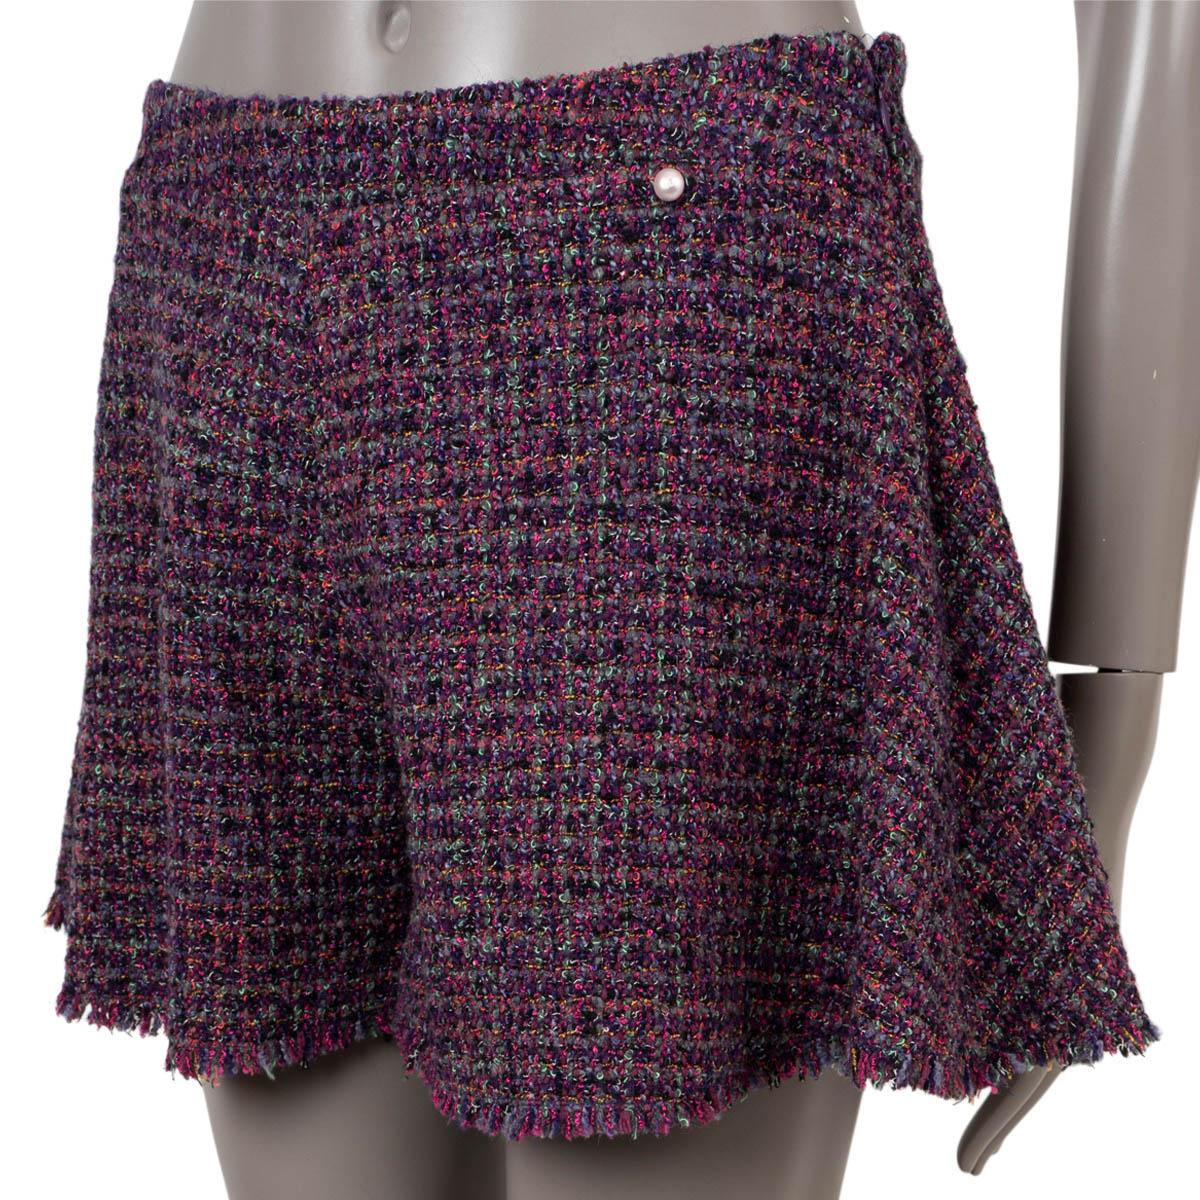 100% authentic Chanel tweed skorts in pink, purple and multicolor wool (37%), acrylic (18%), rayon (16%), polyester (15%) and nylon (14%). Feature a pearl button at the waist. Closes with a concealed zipper on the side. Lined in silk (100%). Have